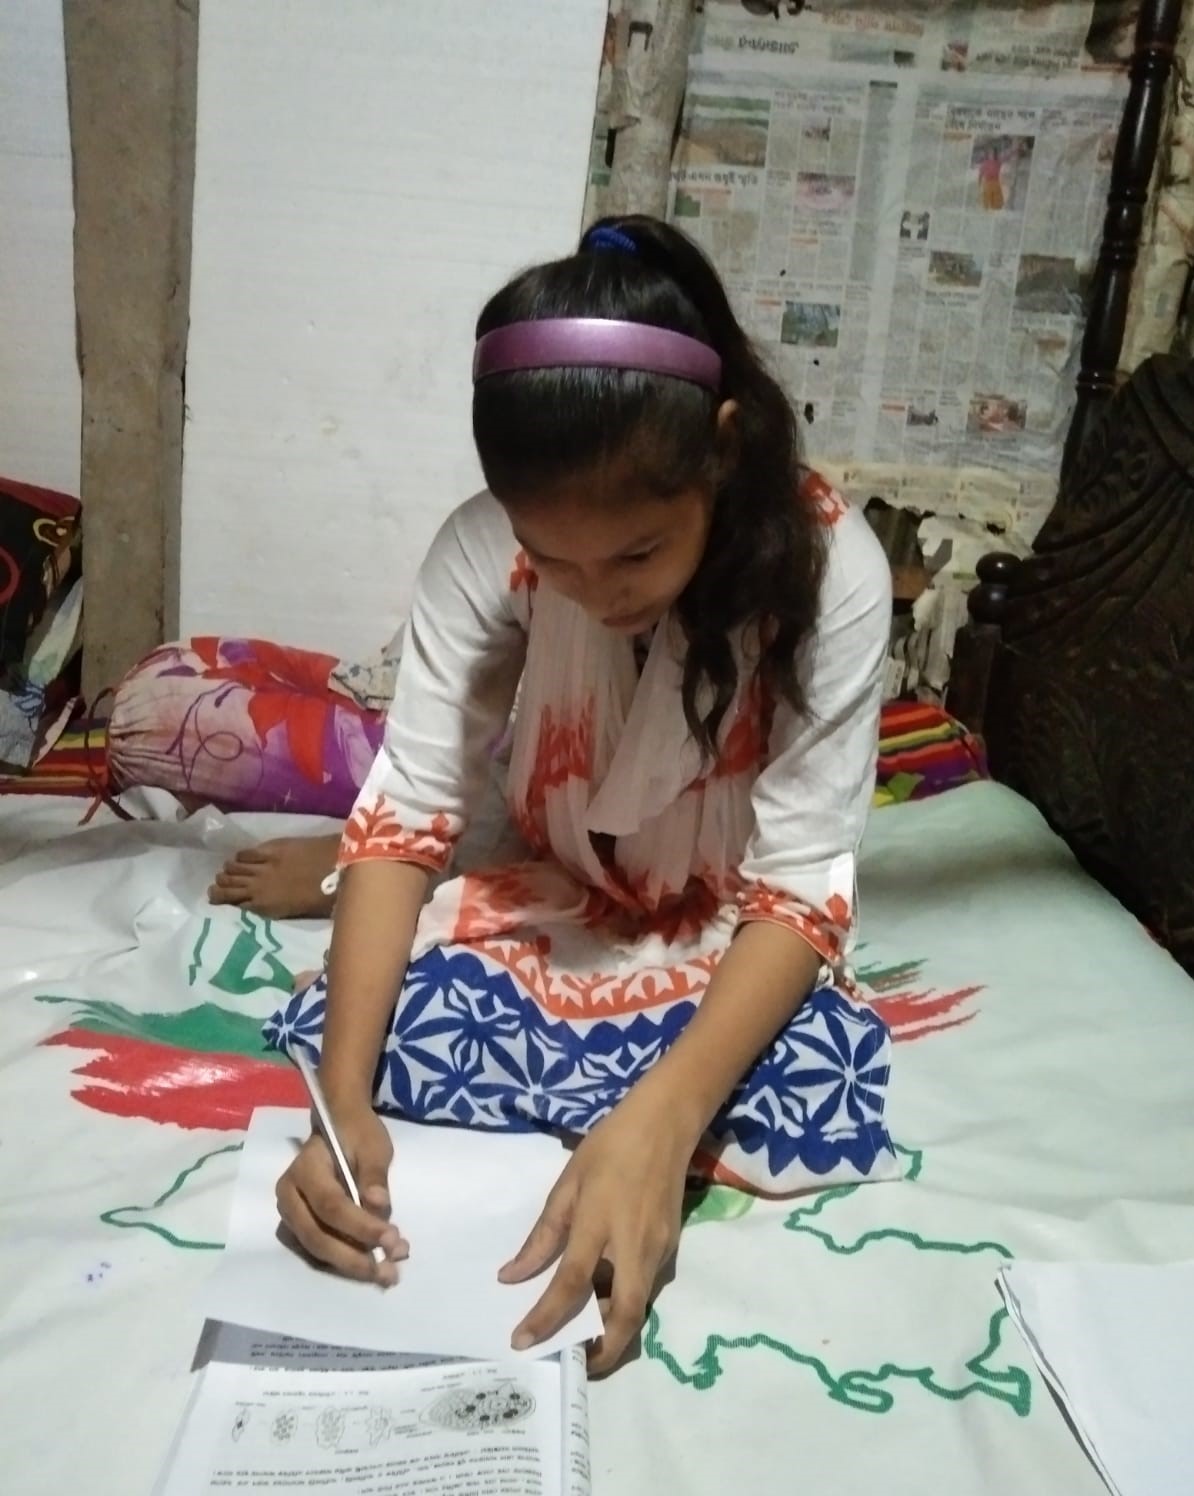 Khushi Drawing a figure from her science book